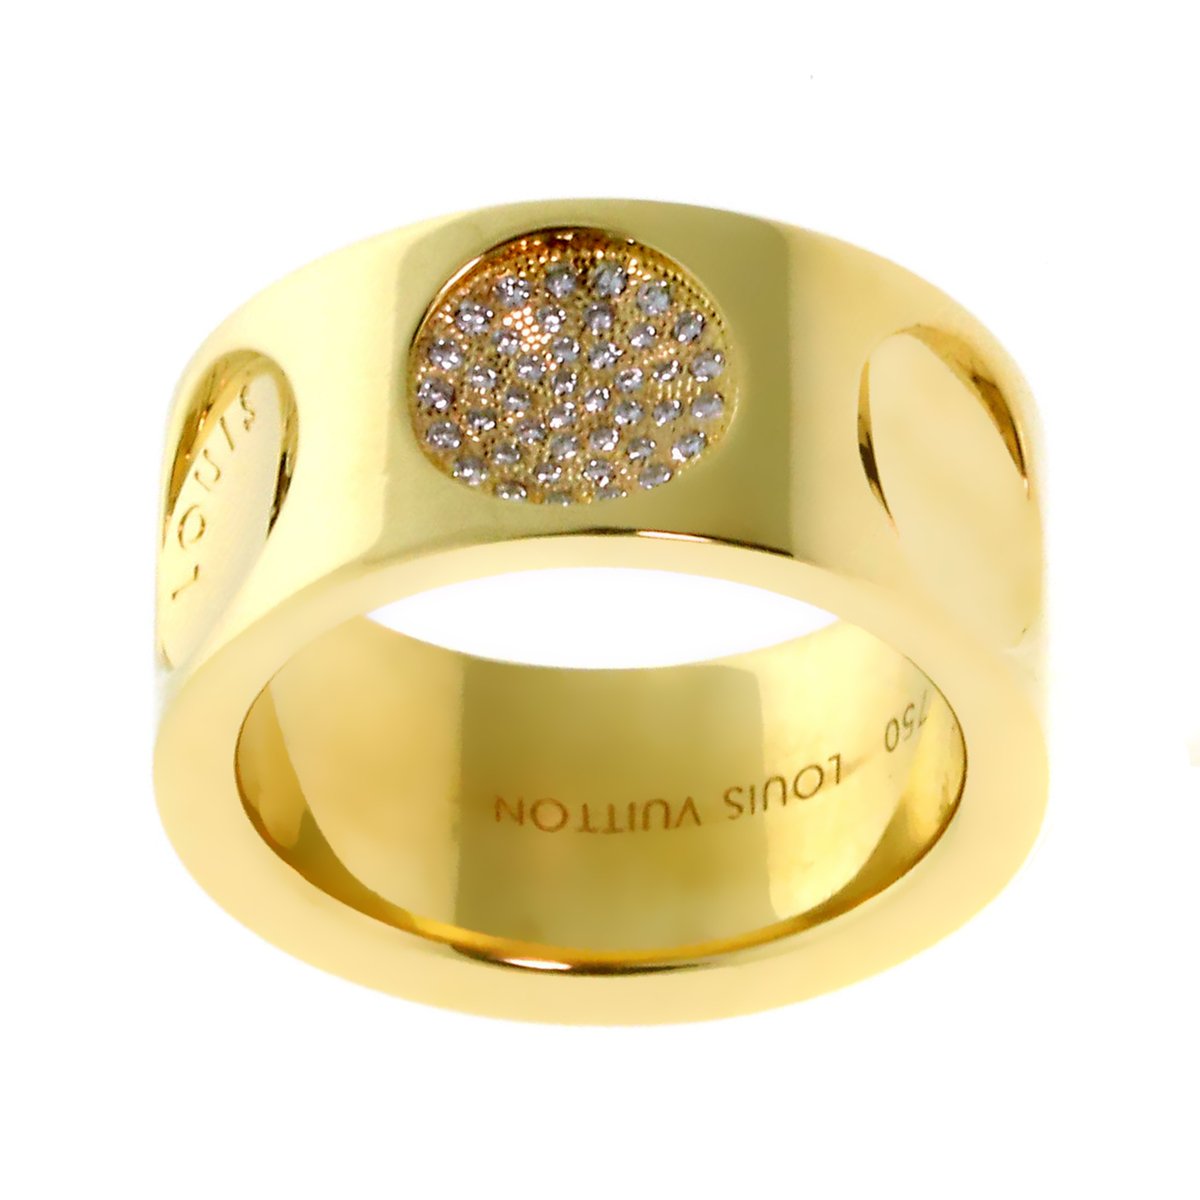 Louis Vuitton - Authenticated Ring - Gold Plated Gold for Women, Very Good Condition